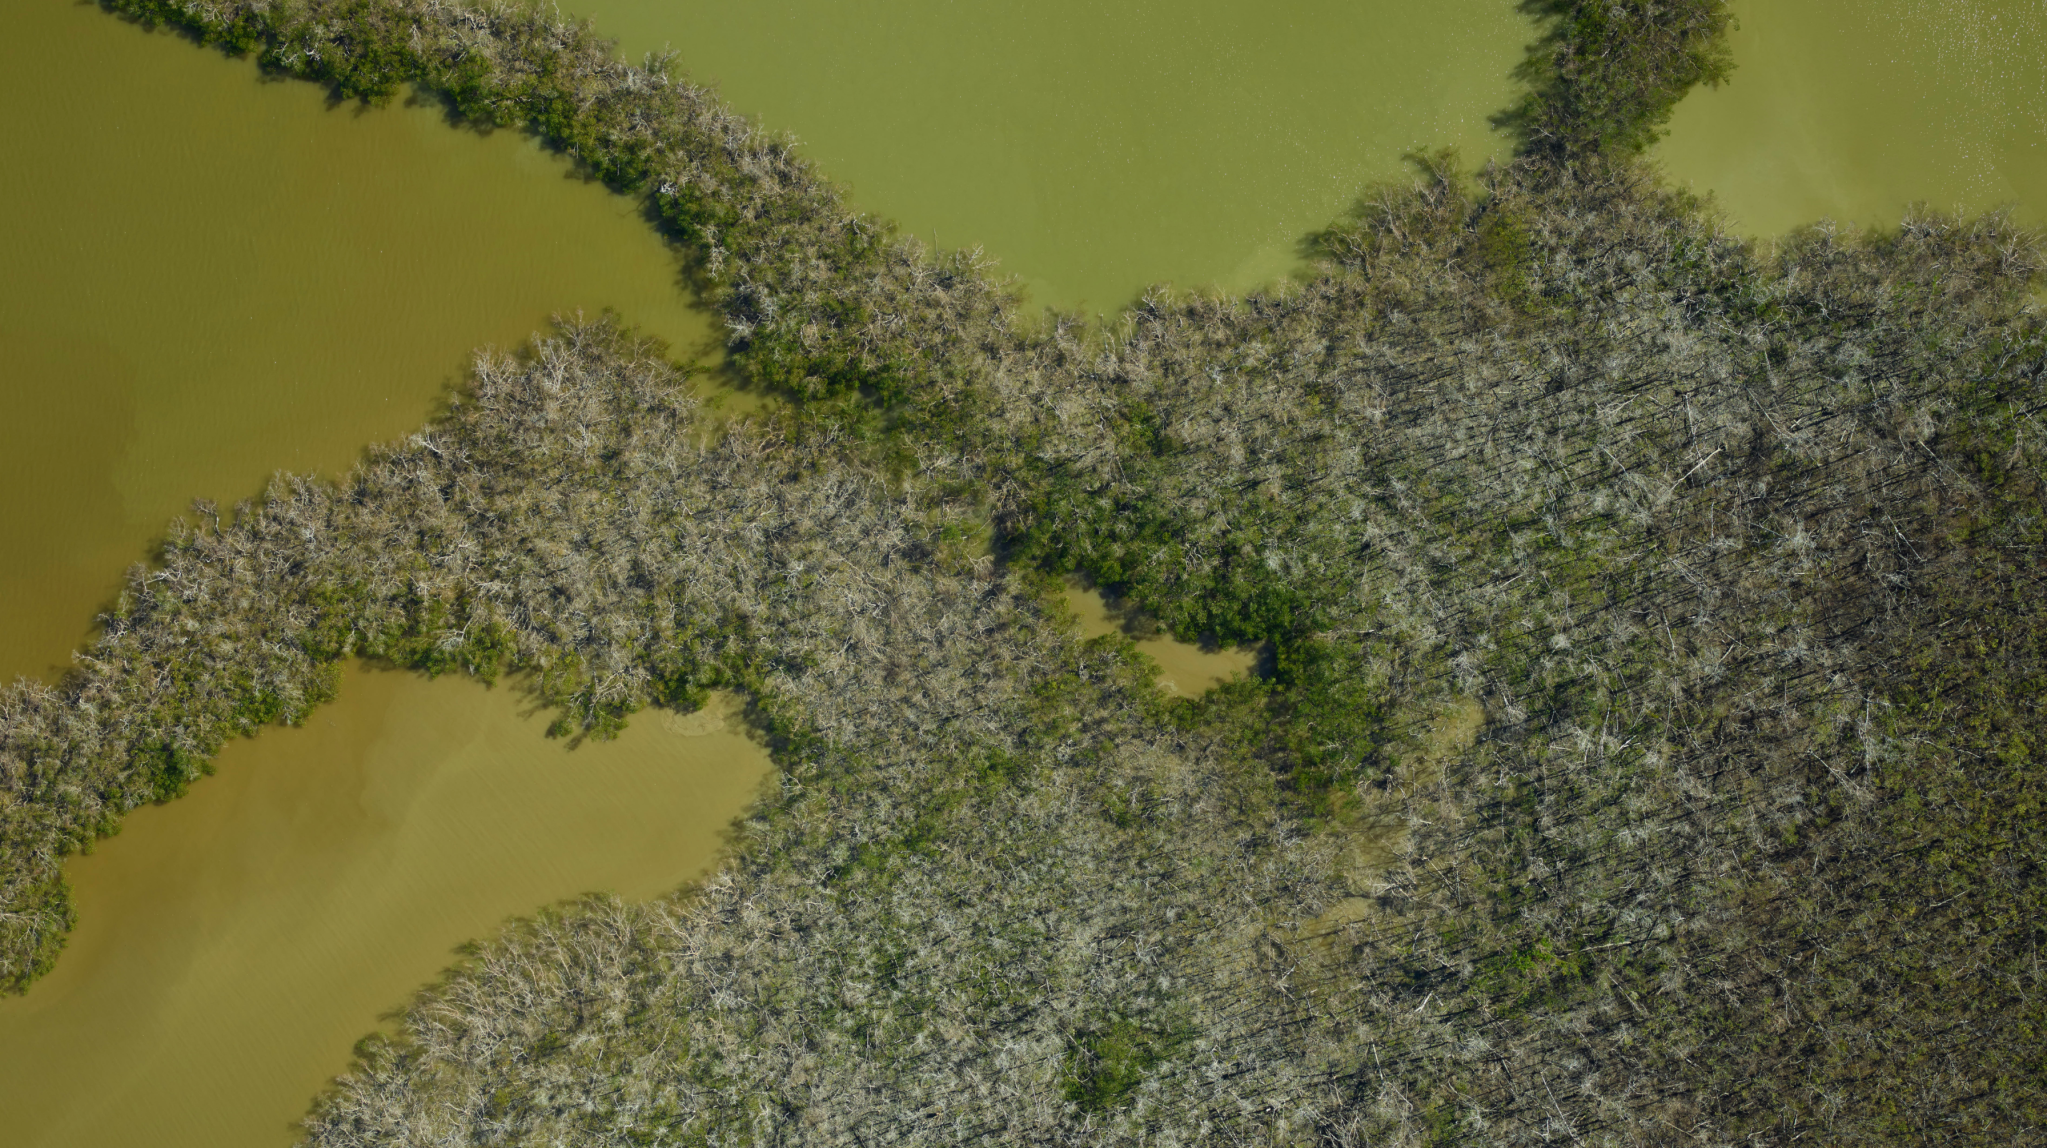 An aerial photo of mangrove forests in the Everglades after a hurricane. The forested land covers most of the center and lower right of the image, with three thin land bridges extending to the top, upper left, and lower left, a bit like starfish arms. The forests themselves appear dry and deadened in shades of gray-brown. The water surrounding the land is opaque greenish-yellow.